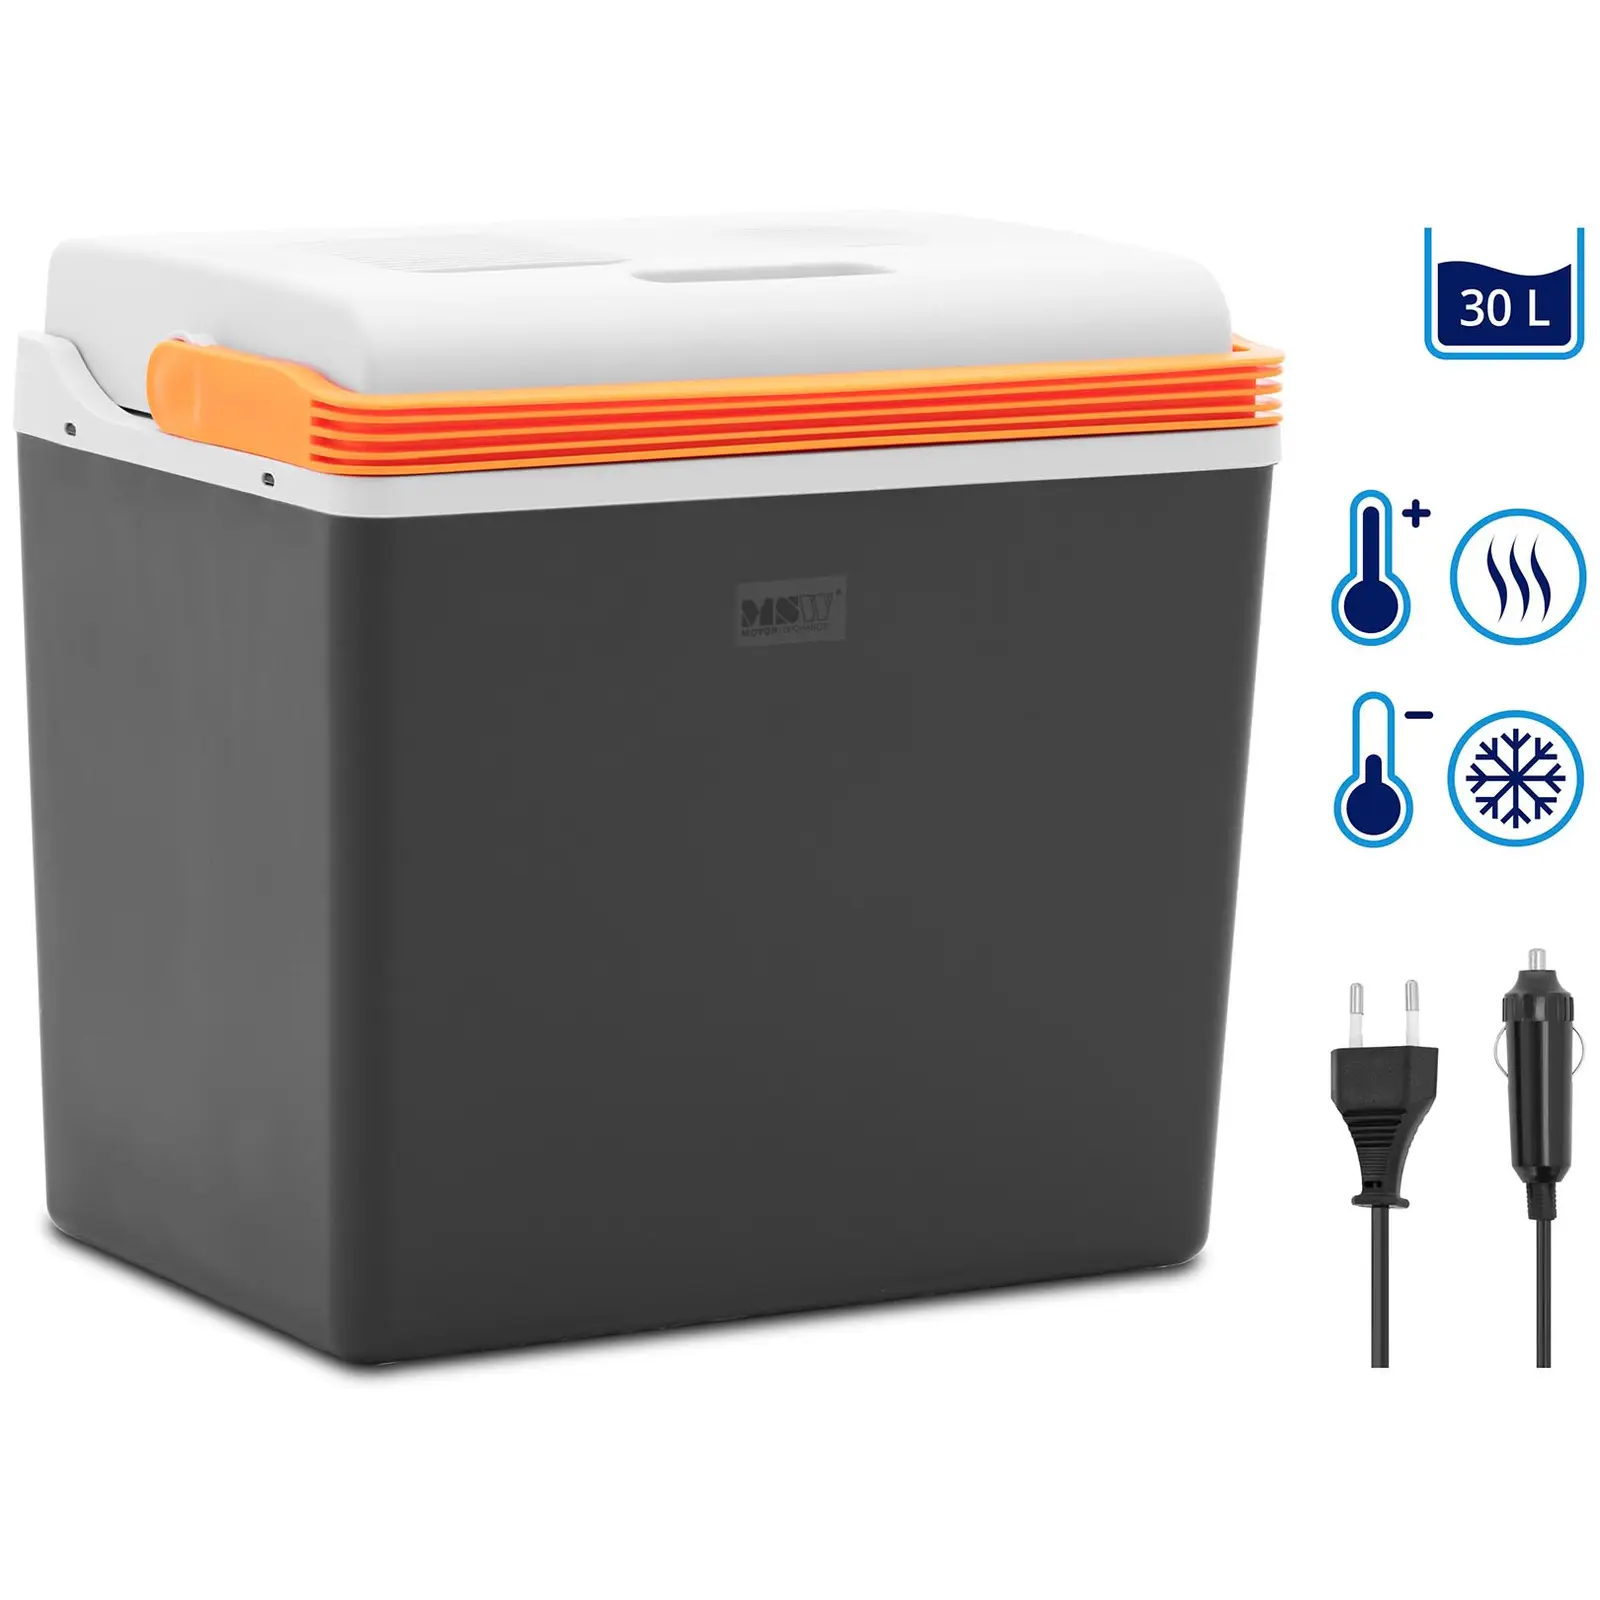 Electric Cooler 12 V / 230 V - 2-in-1 appliance with keep-warm function - 30 L